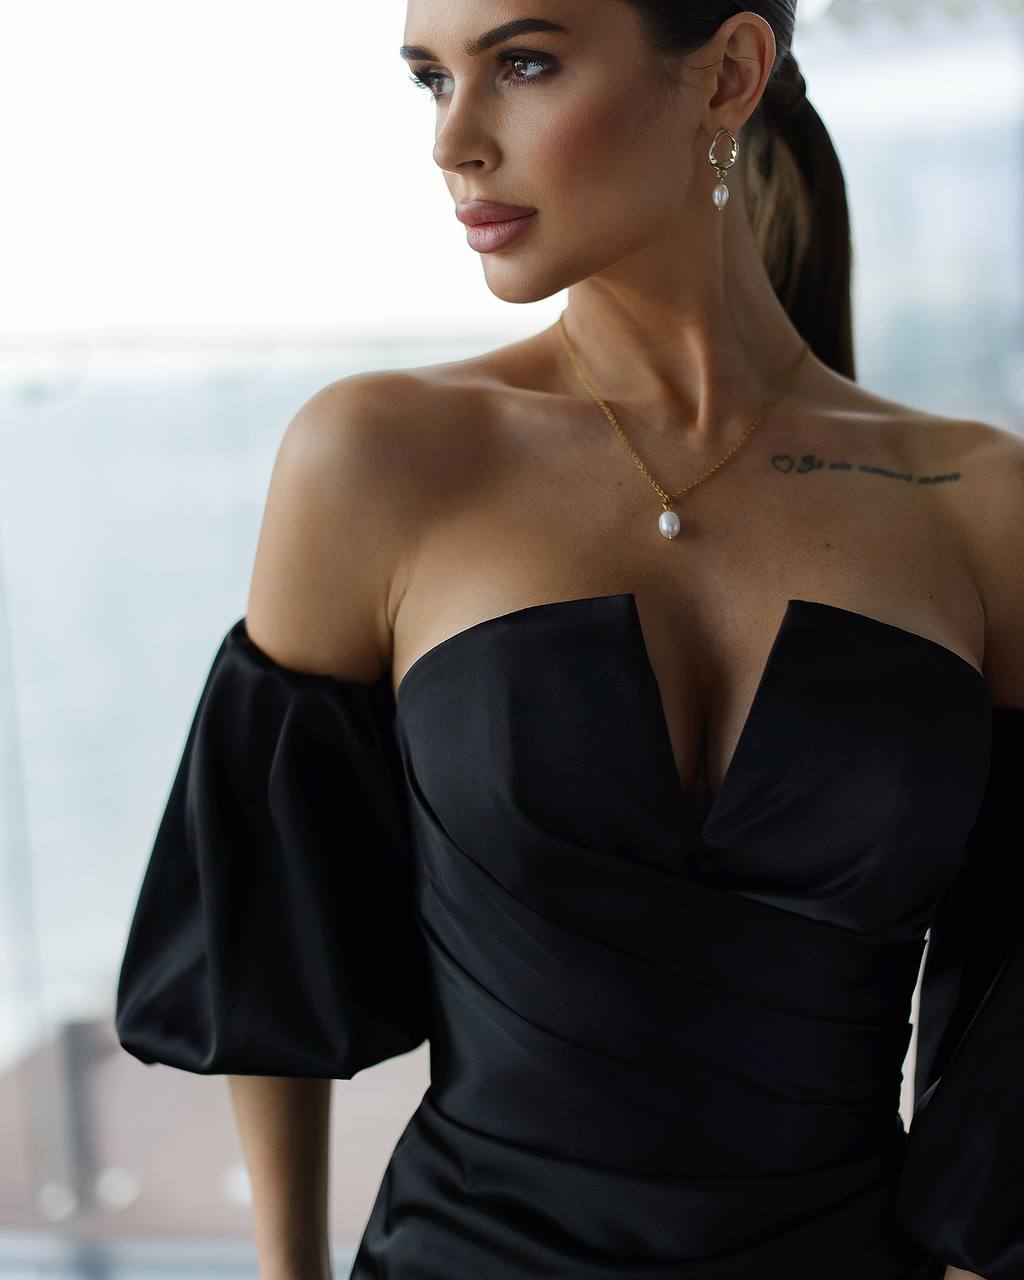 a woman wearing a black dress and a pearl necklace